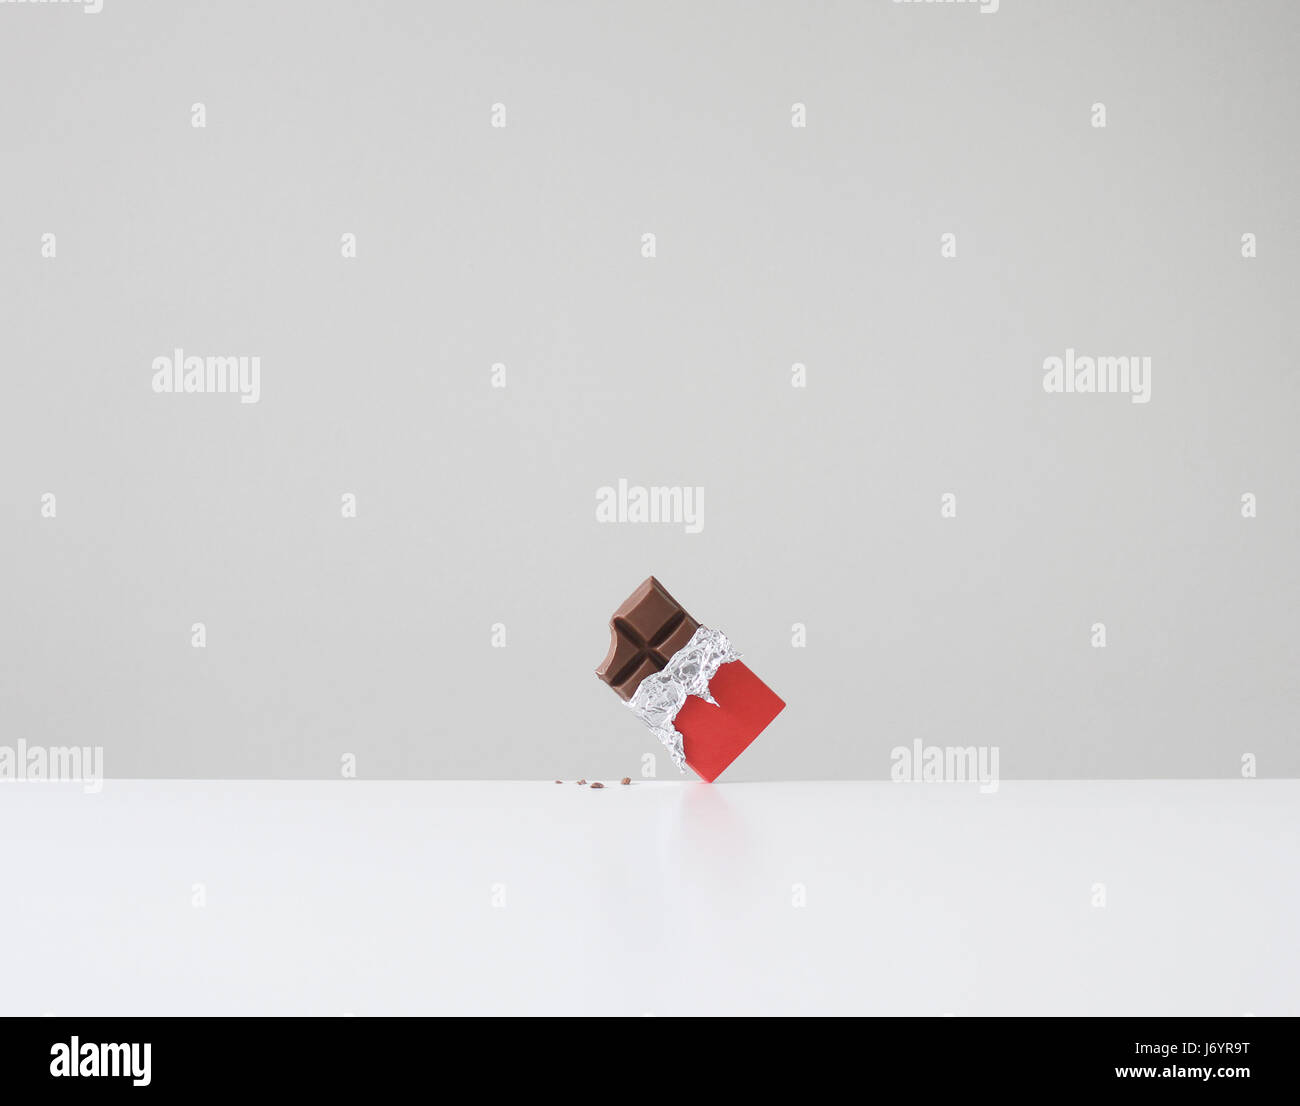 Chocolate bar with missing bite and chocolate crumbs on table Stock Photo